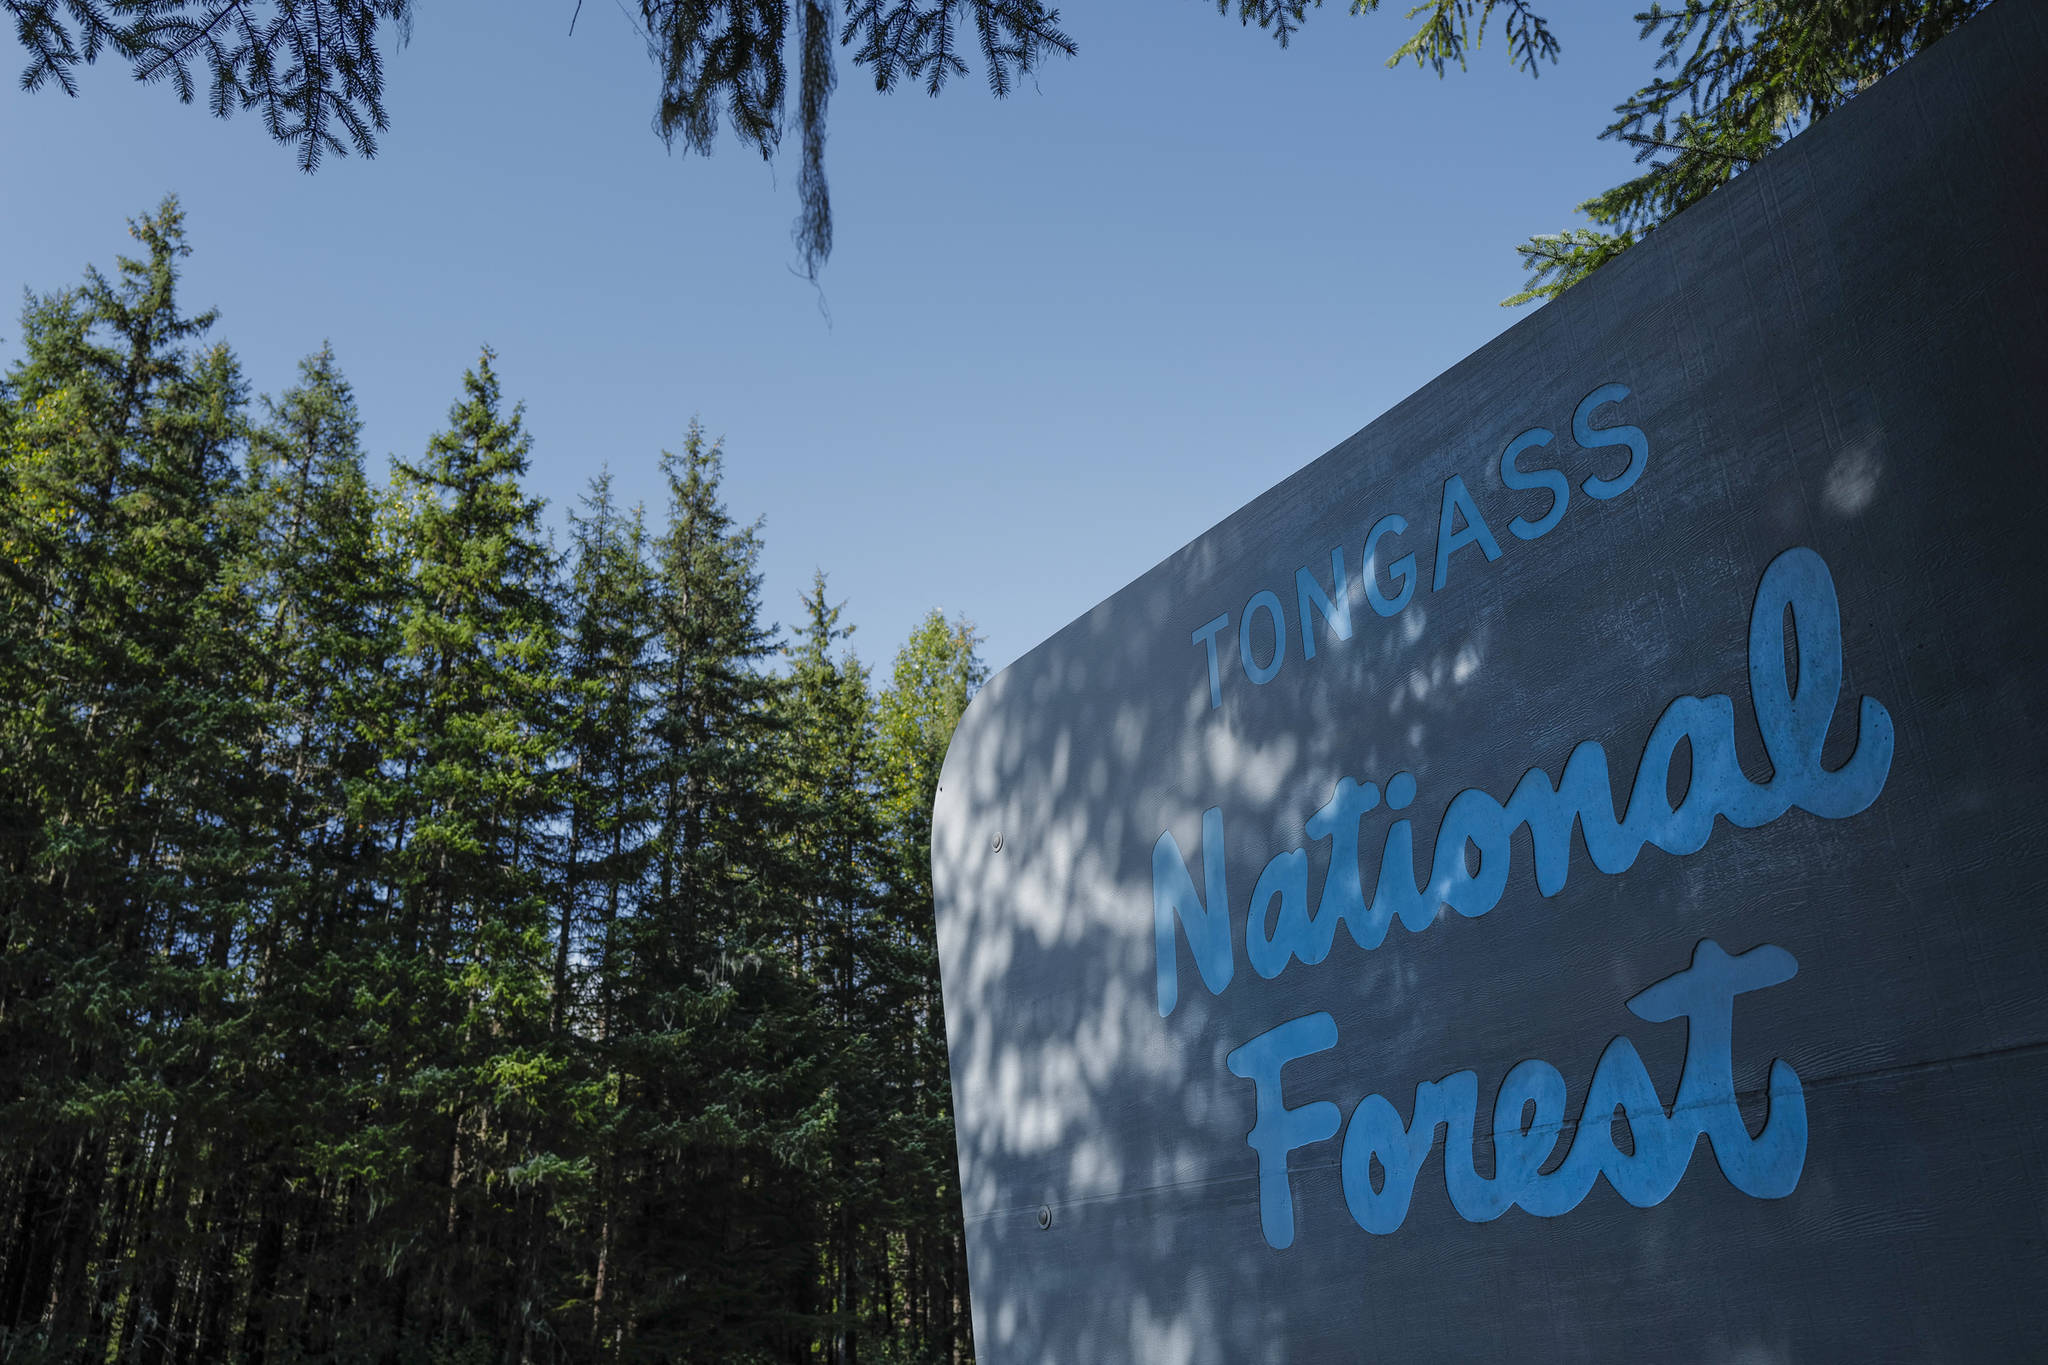 The Tongass National Forest sign on the way to the Mendenhall Glacier Visitor Center. The visitor center will host a Fireside Lecture Friday, Jan. 10. (Michael Penn | Juneau Empire File)